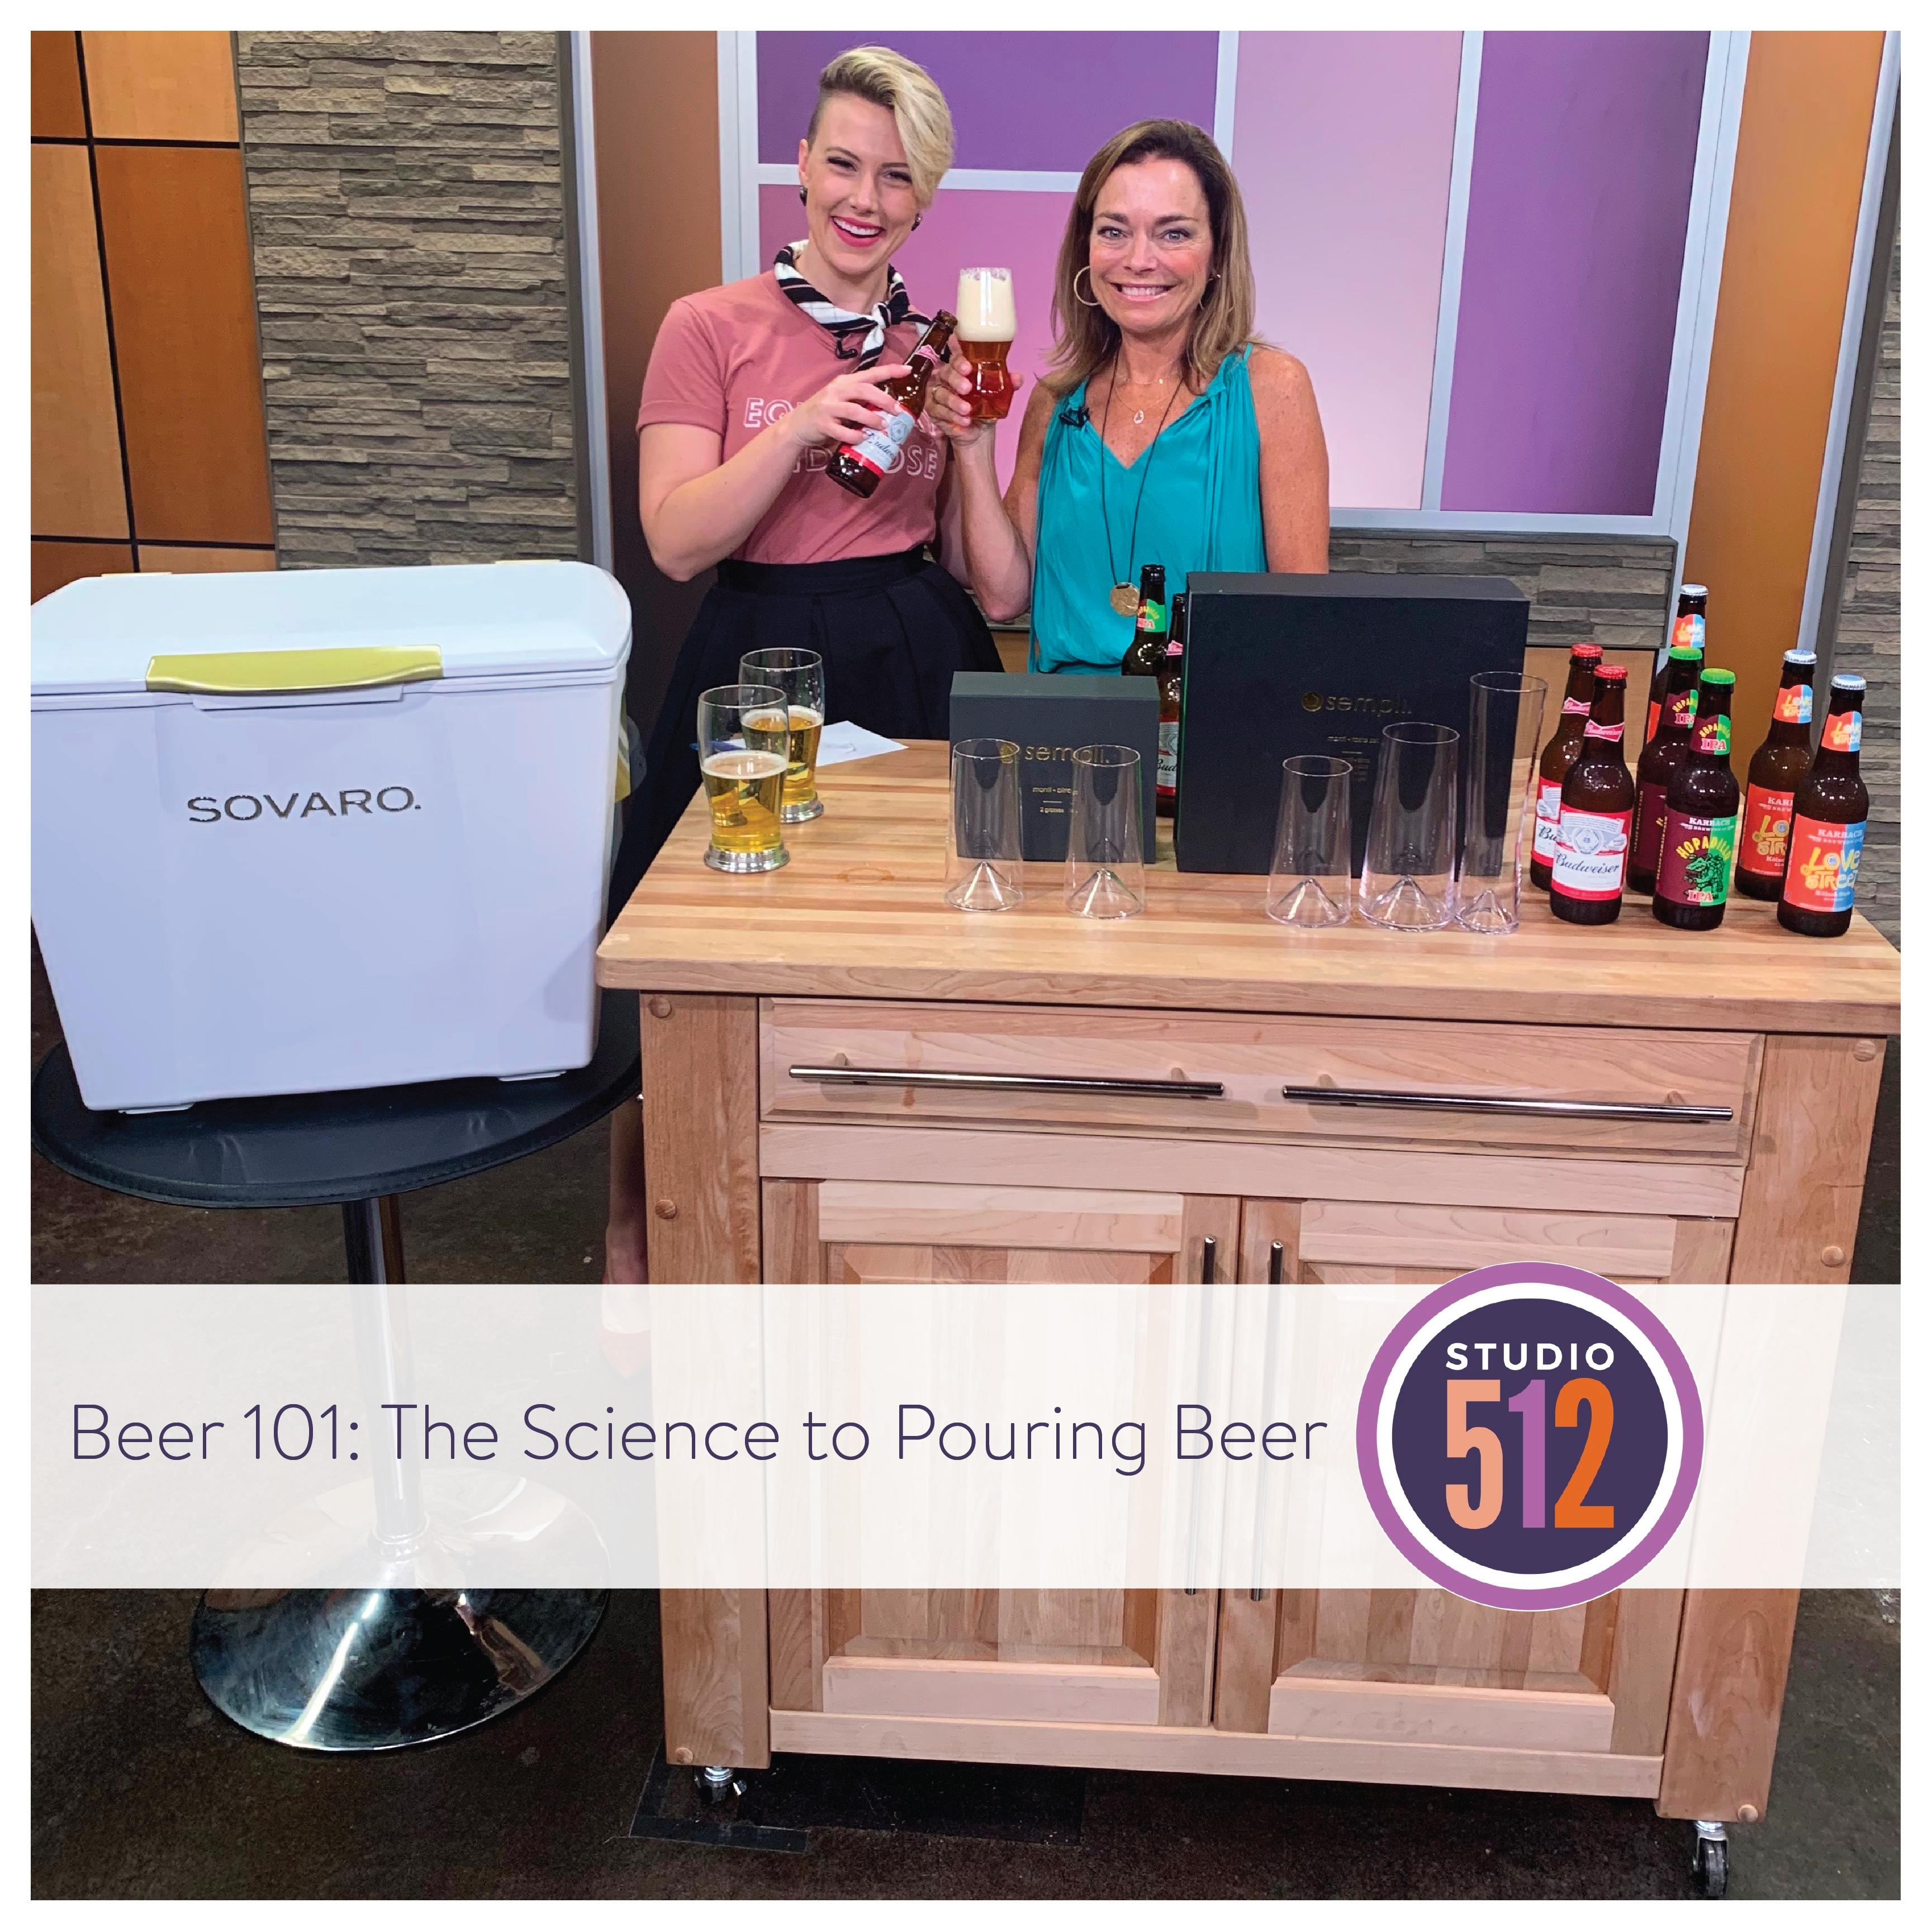 Austin KXAN Studio 512 | Beer 101: The Science to Pouring Beer with Hearth and Soul